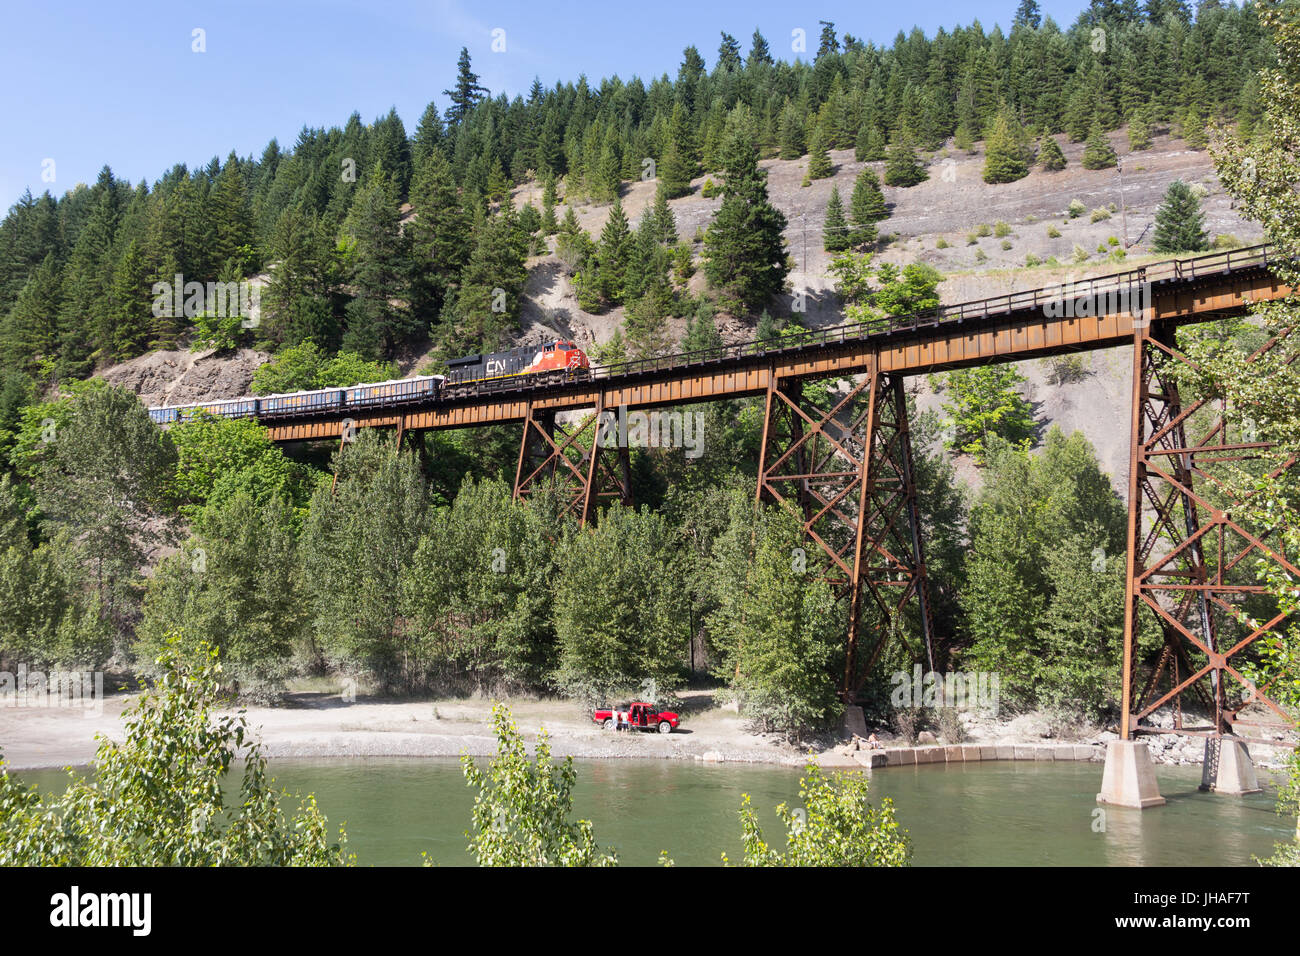 A train operated by CN Rail is crossing the Anderson Creek railway bridge in the Fraser Canyon near Boston Bar, British Columbia, Canada Stock Photo